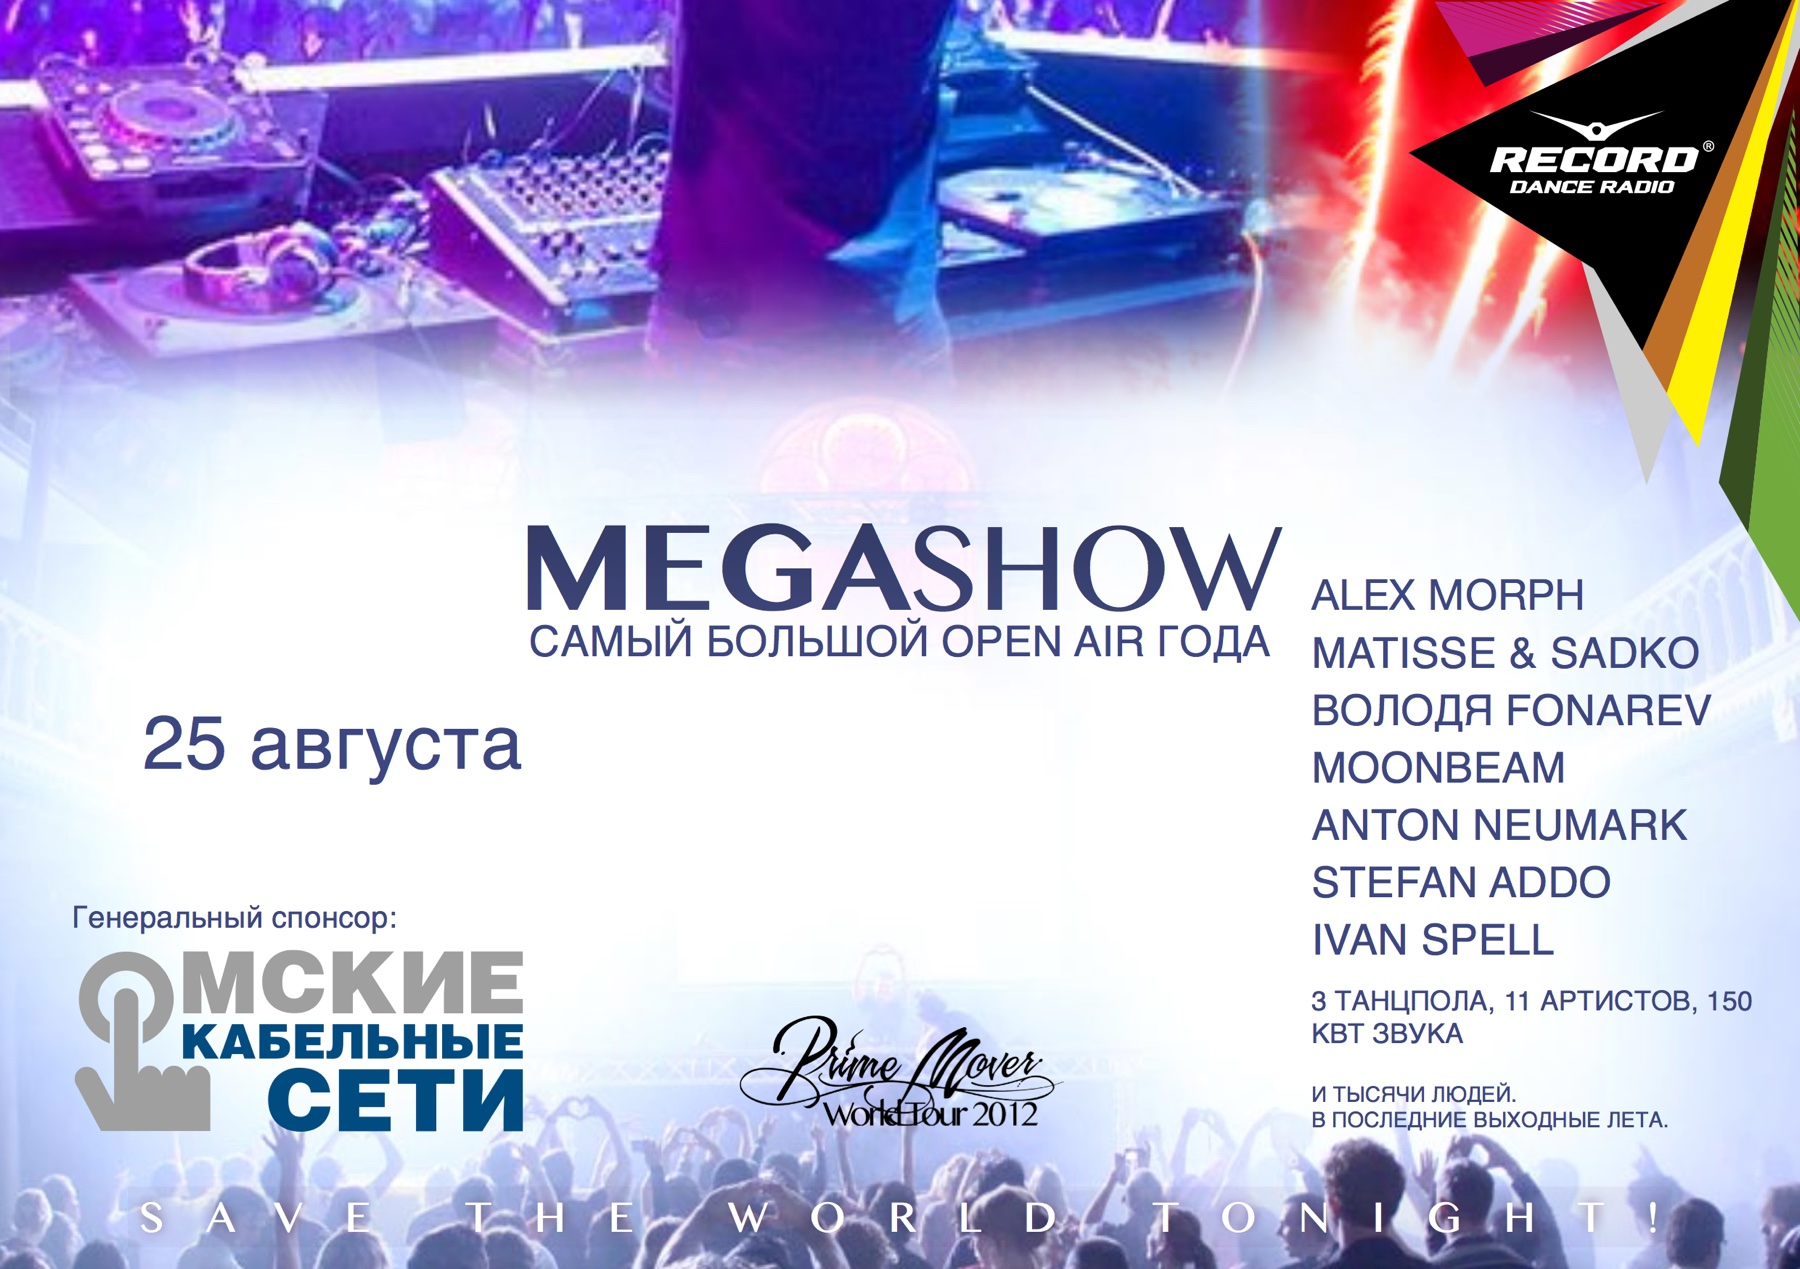 Megashow flyer the most expensive and extensive event in the history of Omsk 25 august 2012 Oleg Borisov Omsk Moscow Russia